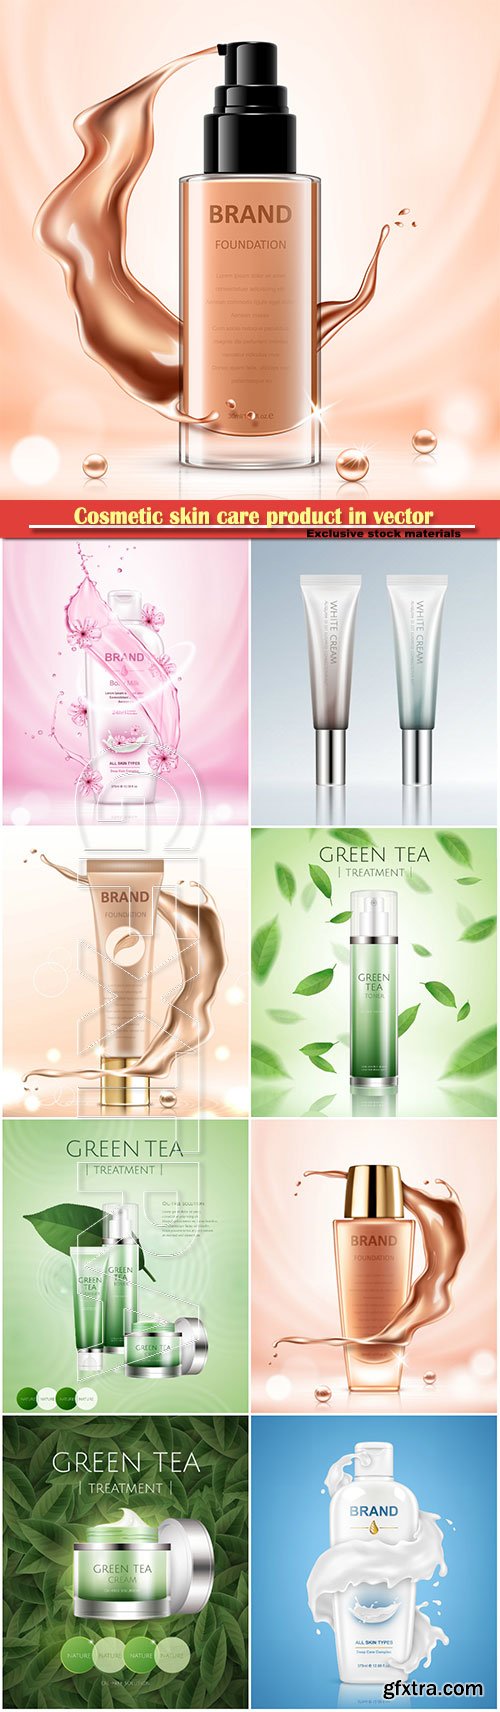 Cosmetic skin care product in vector illustration